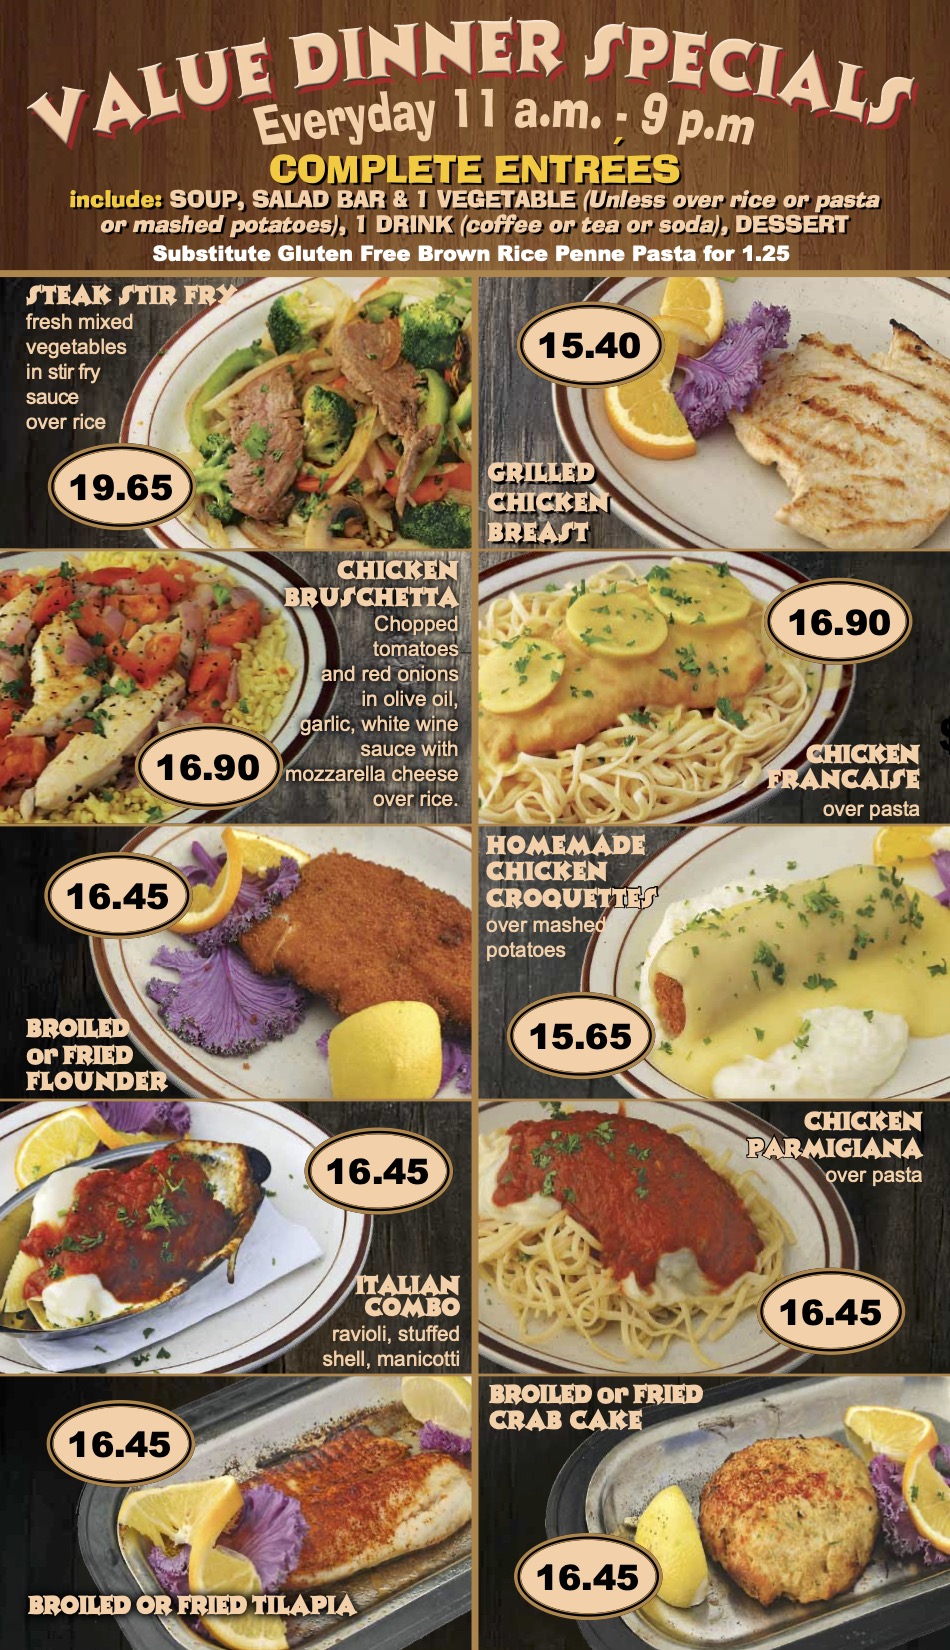 Value Dinner Specials - Eagle Diner | Warminster PA | Our Doors Are